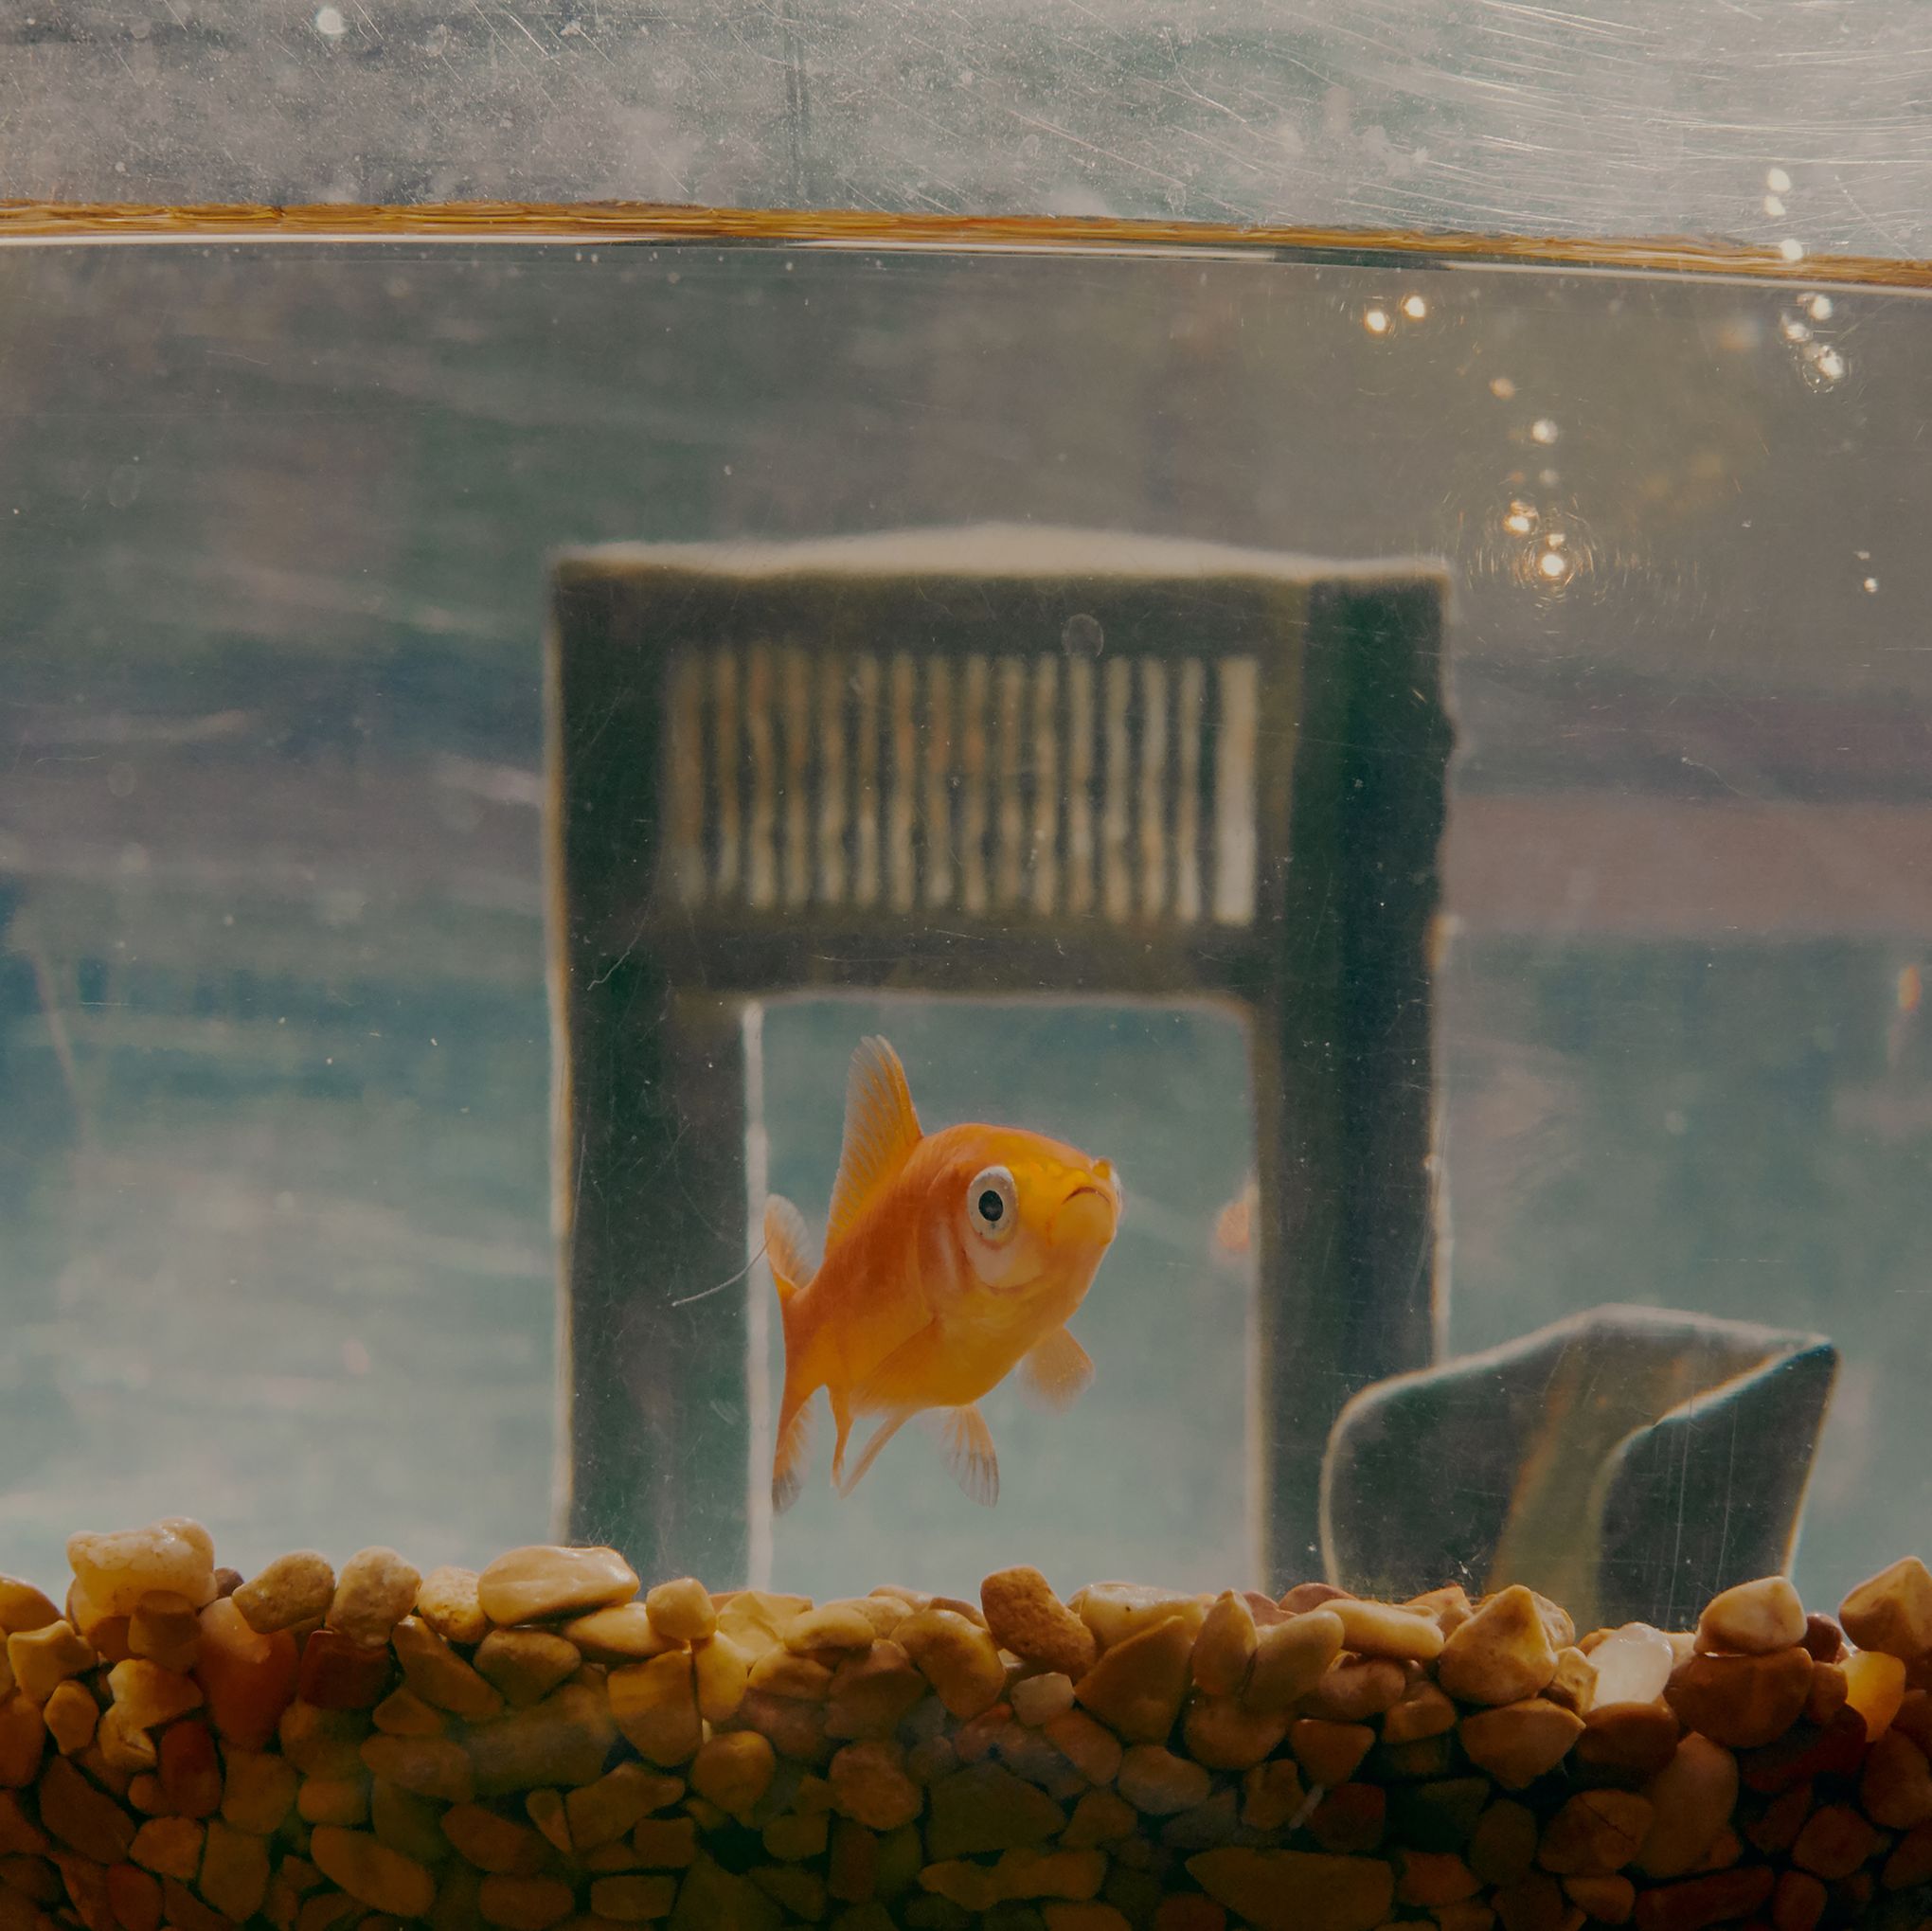 Once They Were Pets. Now Giant Goldfish Are Menacing the Great